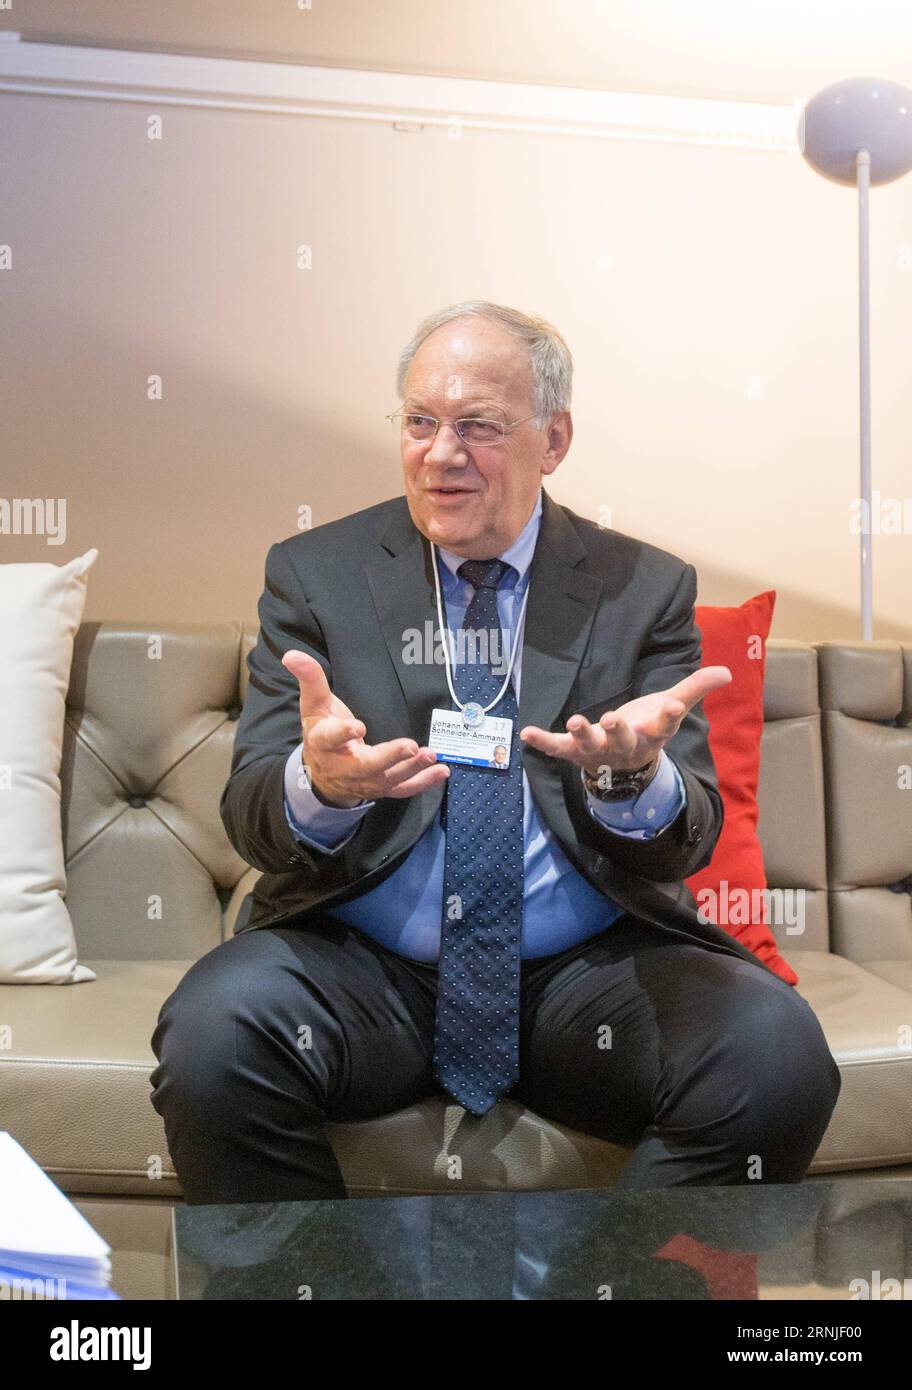 (170120) -- DAVOS, Jan. 20, 2017 () -- Swiss minister of Economic Affairs, Education and Research, Johann Schneider-Ammann, speaks during an interview with News Agency in Davos, Switzerland, Jan. 18, 2017. China and Switzerland have enjoyed a longstanding win-win partnership and China has an optimistic economic outlook, Johann Schneider-Ammann said here Wednesday. () (zw) SWITZERLAND-DAVOS-ECONOMY-INTERVIEW Xinhua PUBLICATIONxNOTxINxCHN   Davos Jan 20 2017 Swiss Ministers of Economic Affairs Education and Research Johann Schneider Ammann Speaks during to Interview With News Agency in Davos Swi Stock Photo